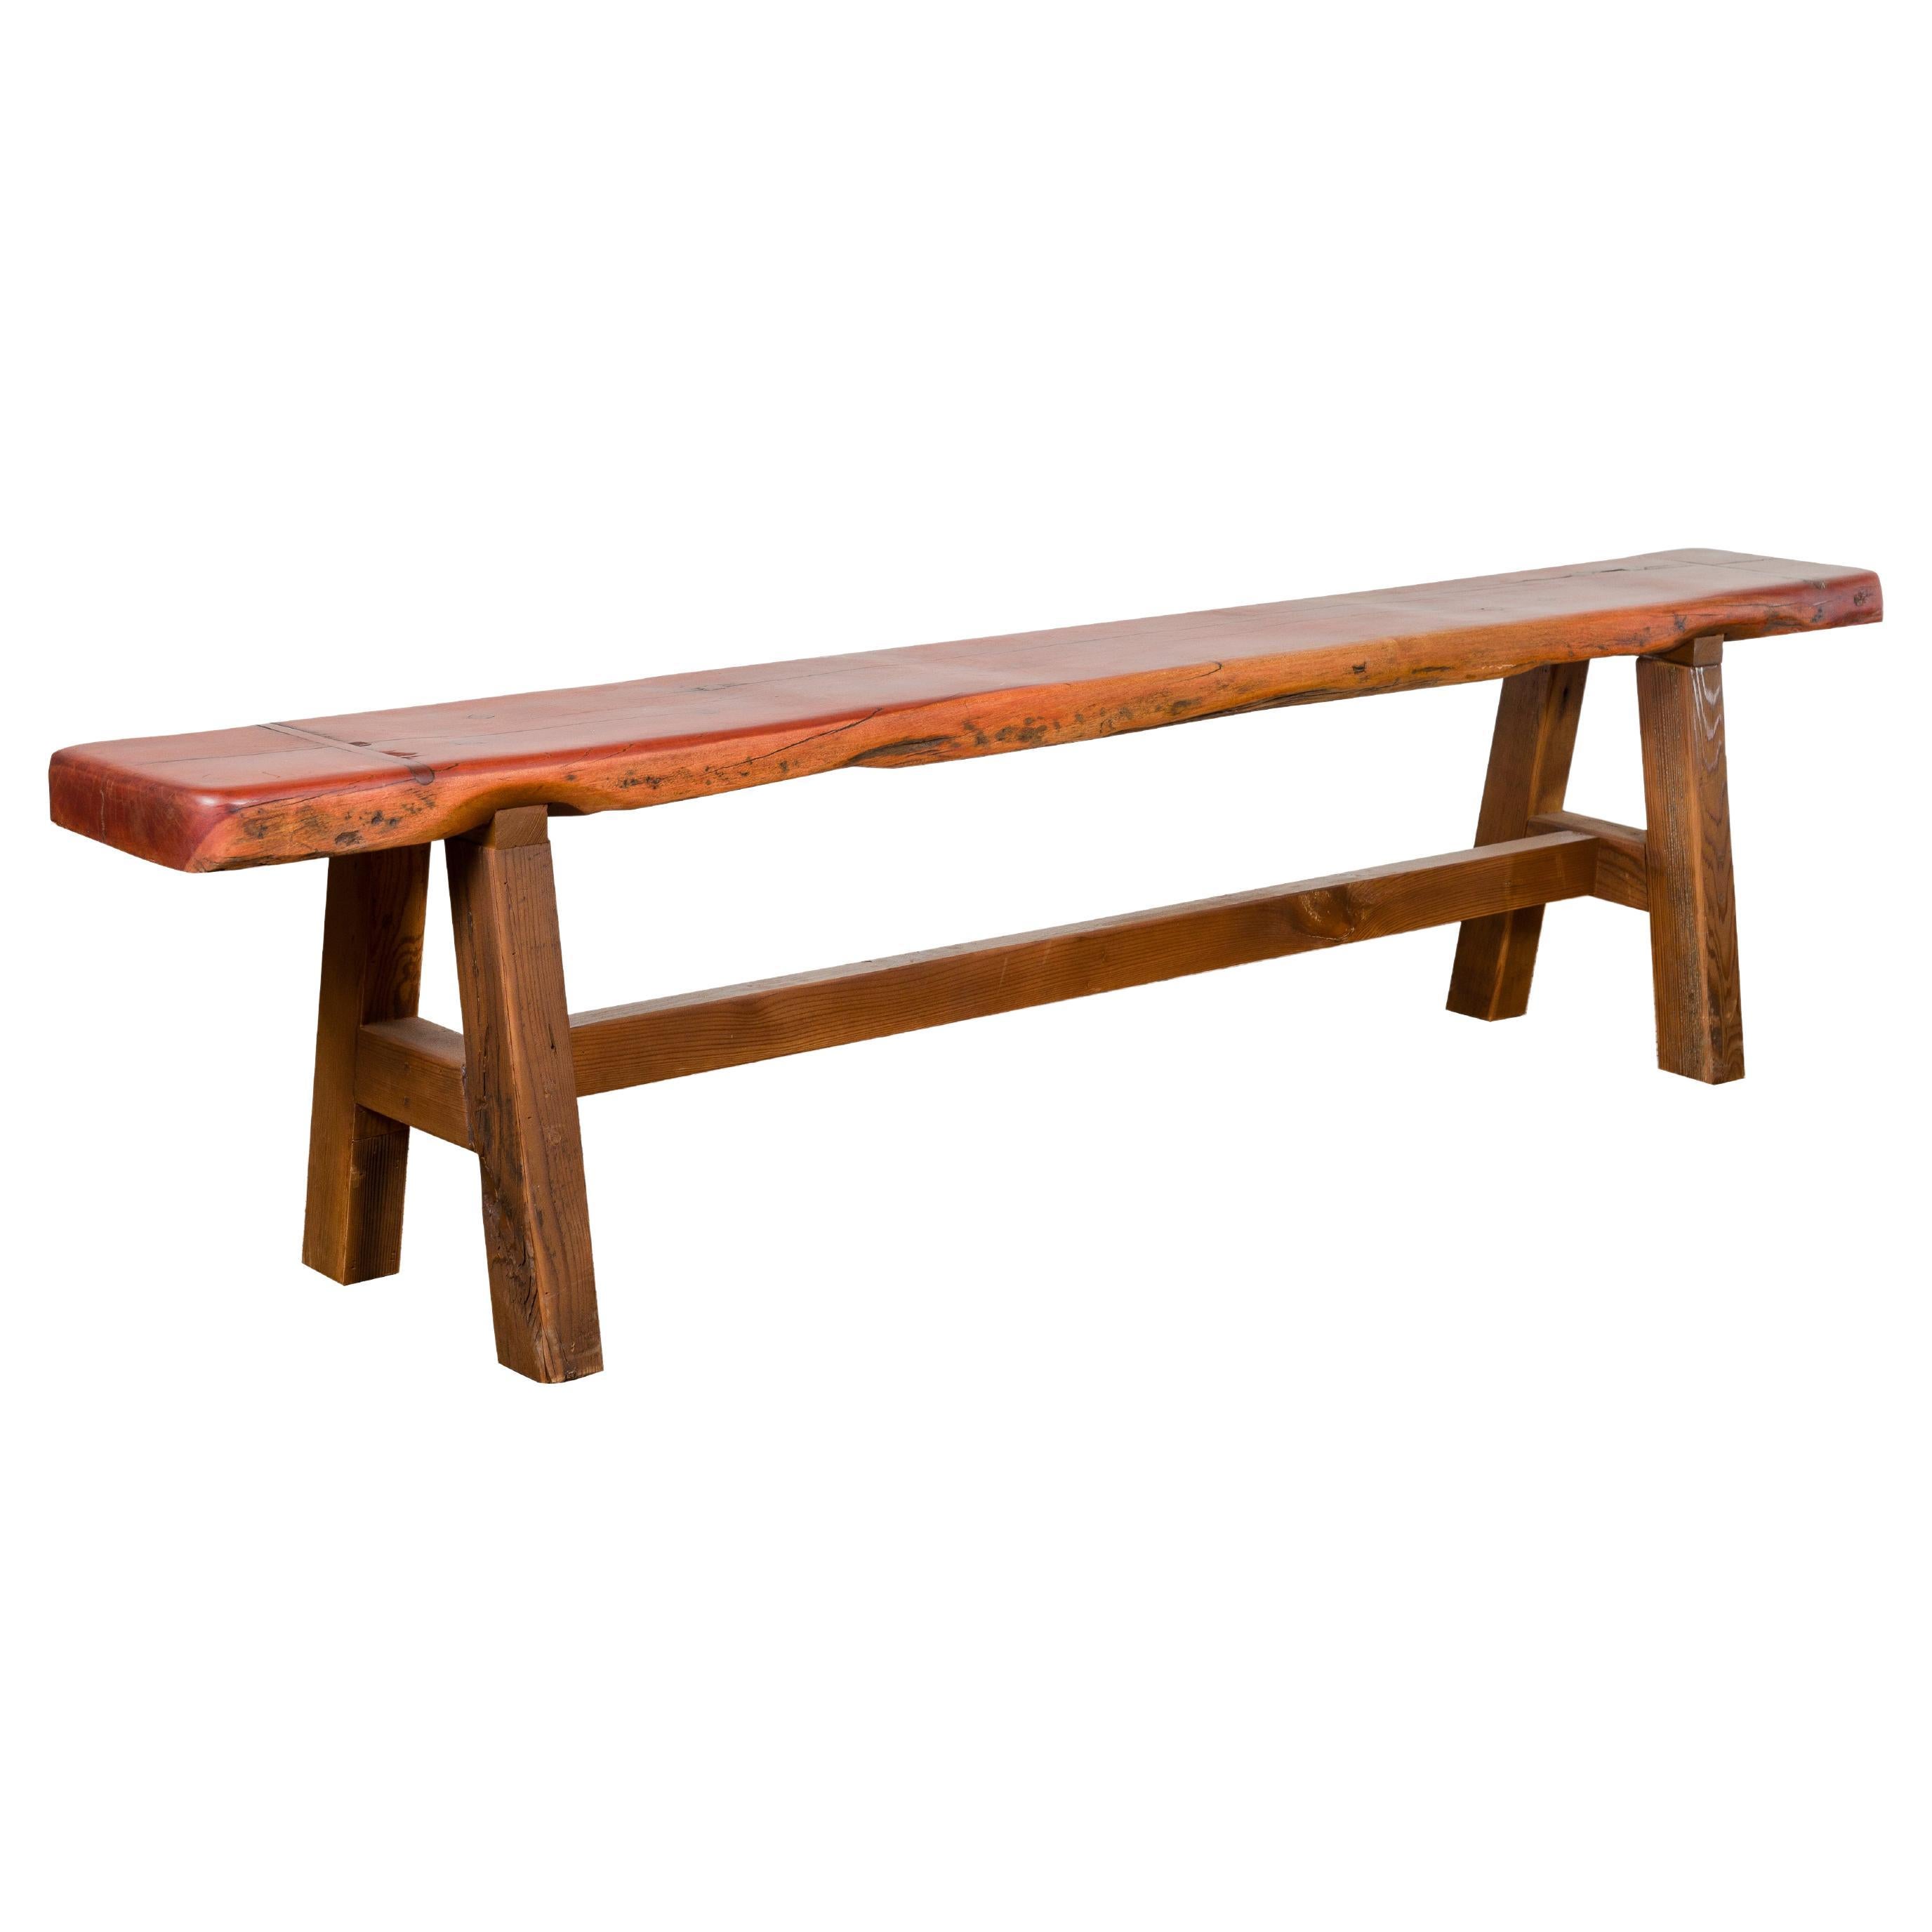 Mingei Style Rustic A-Frame Wooden Bench Made of Railroad Ties with Stretcher For Sale